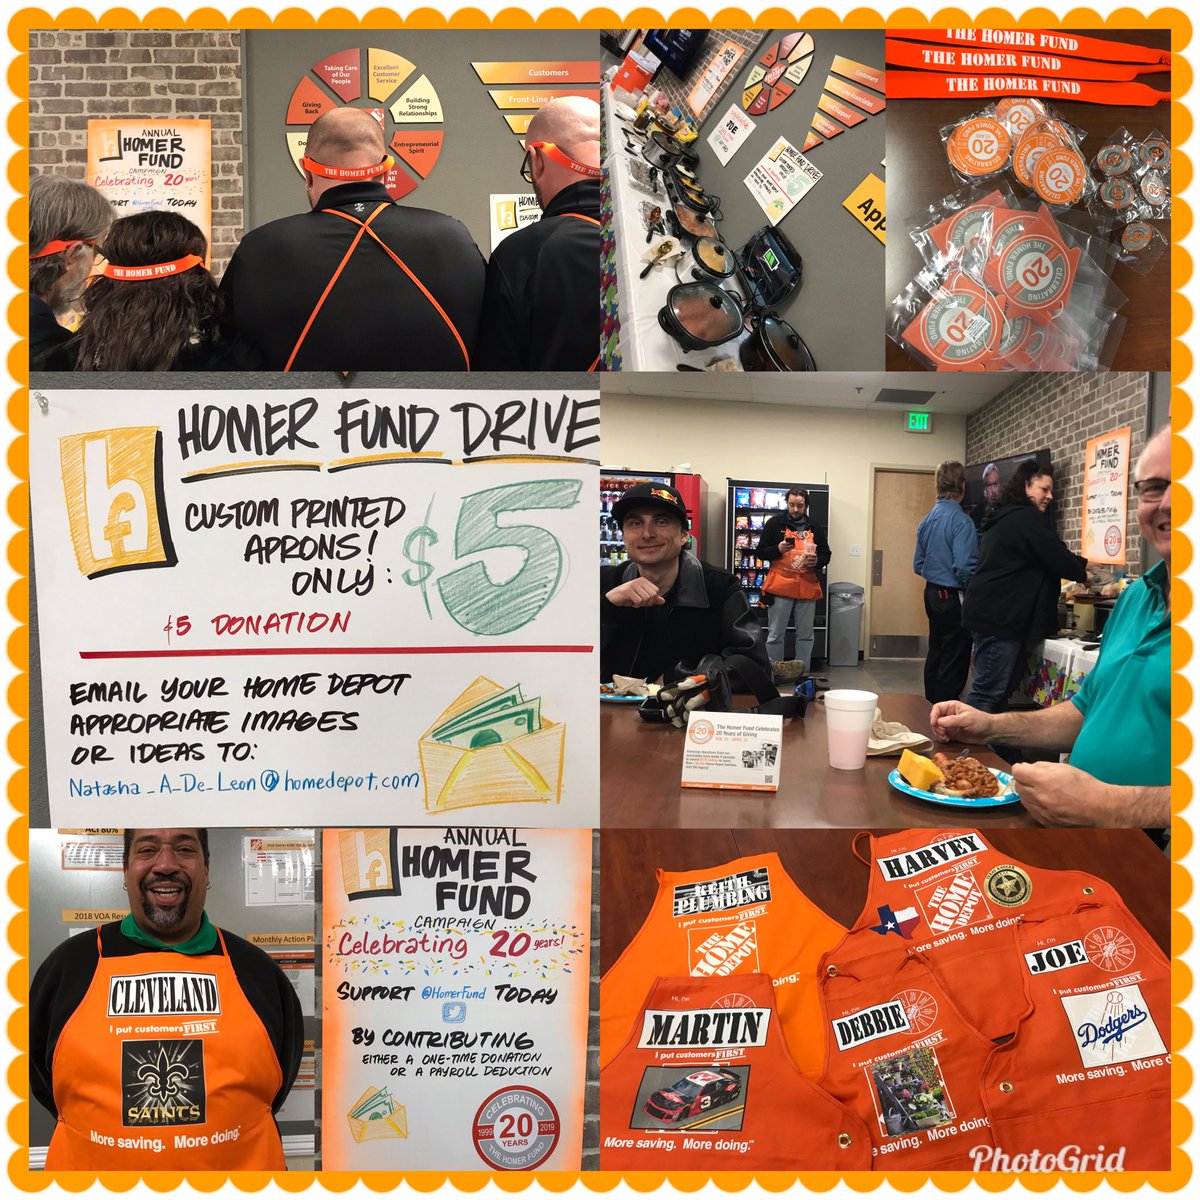 #3316Rocks #ISupportTHF with Homer Fund Campaign Drive on our way to 100% participation! #Celebrating20Years of ⁦@HomerFund⁩ ⁦@MLGRIZZ⁩ ⁦@Hayward619⁩ ⁦@TonjaBarnicle⁩ ⁦@thdsaltarelli⁩ ⁦@THD3316⁩ ⁦@THD3318⁩